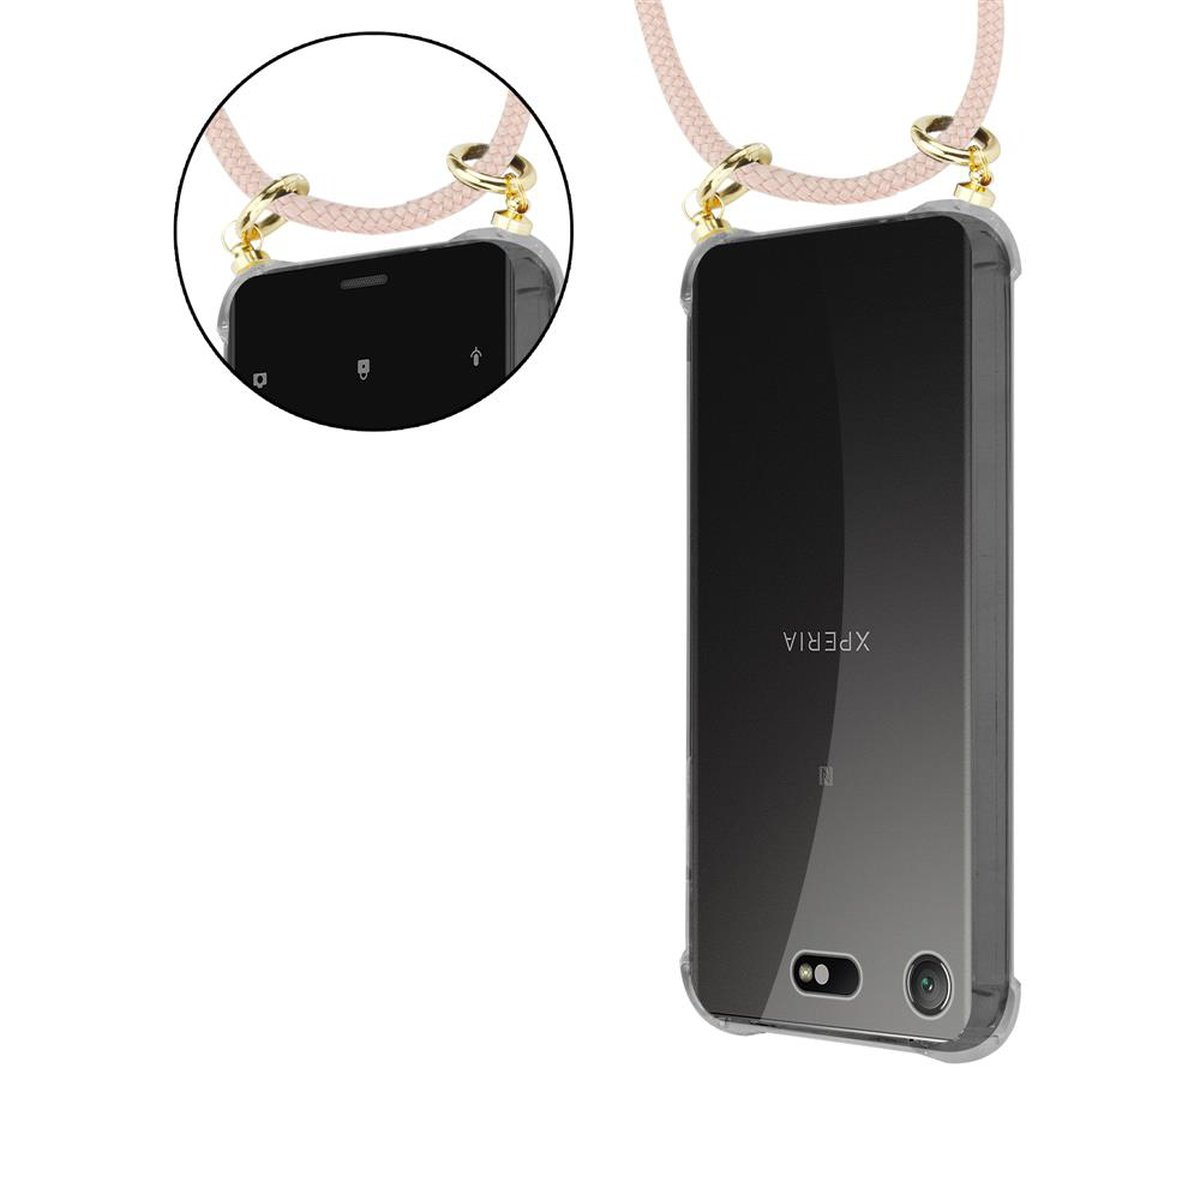 Kordel Hülle, mit Backcover, Ringen, Gold Kette CADORABO Sony, Band PERLIG Handy und COMPACT, ROSÉGOLD Xperia abnehmbarer XZ1